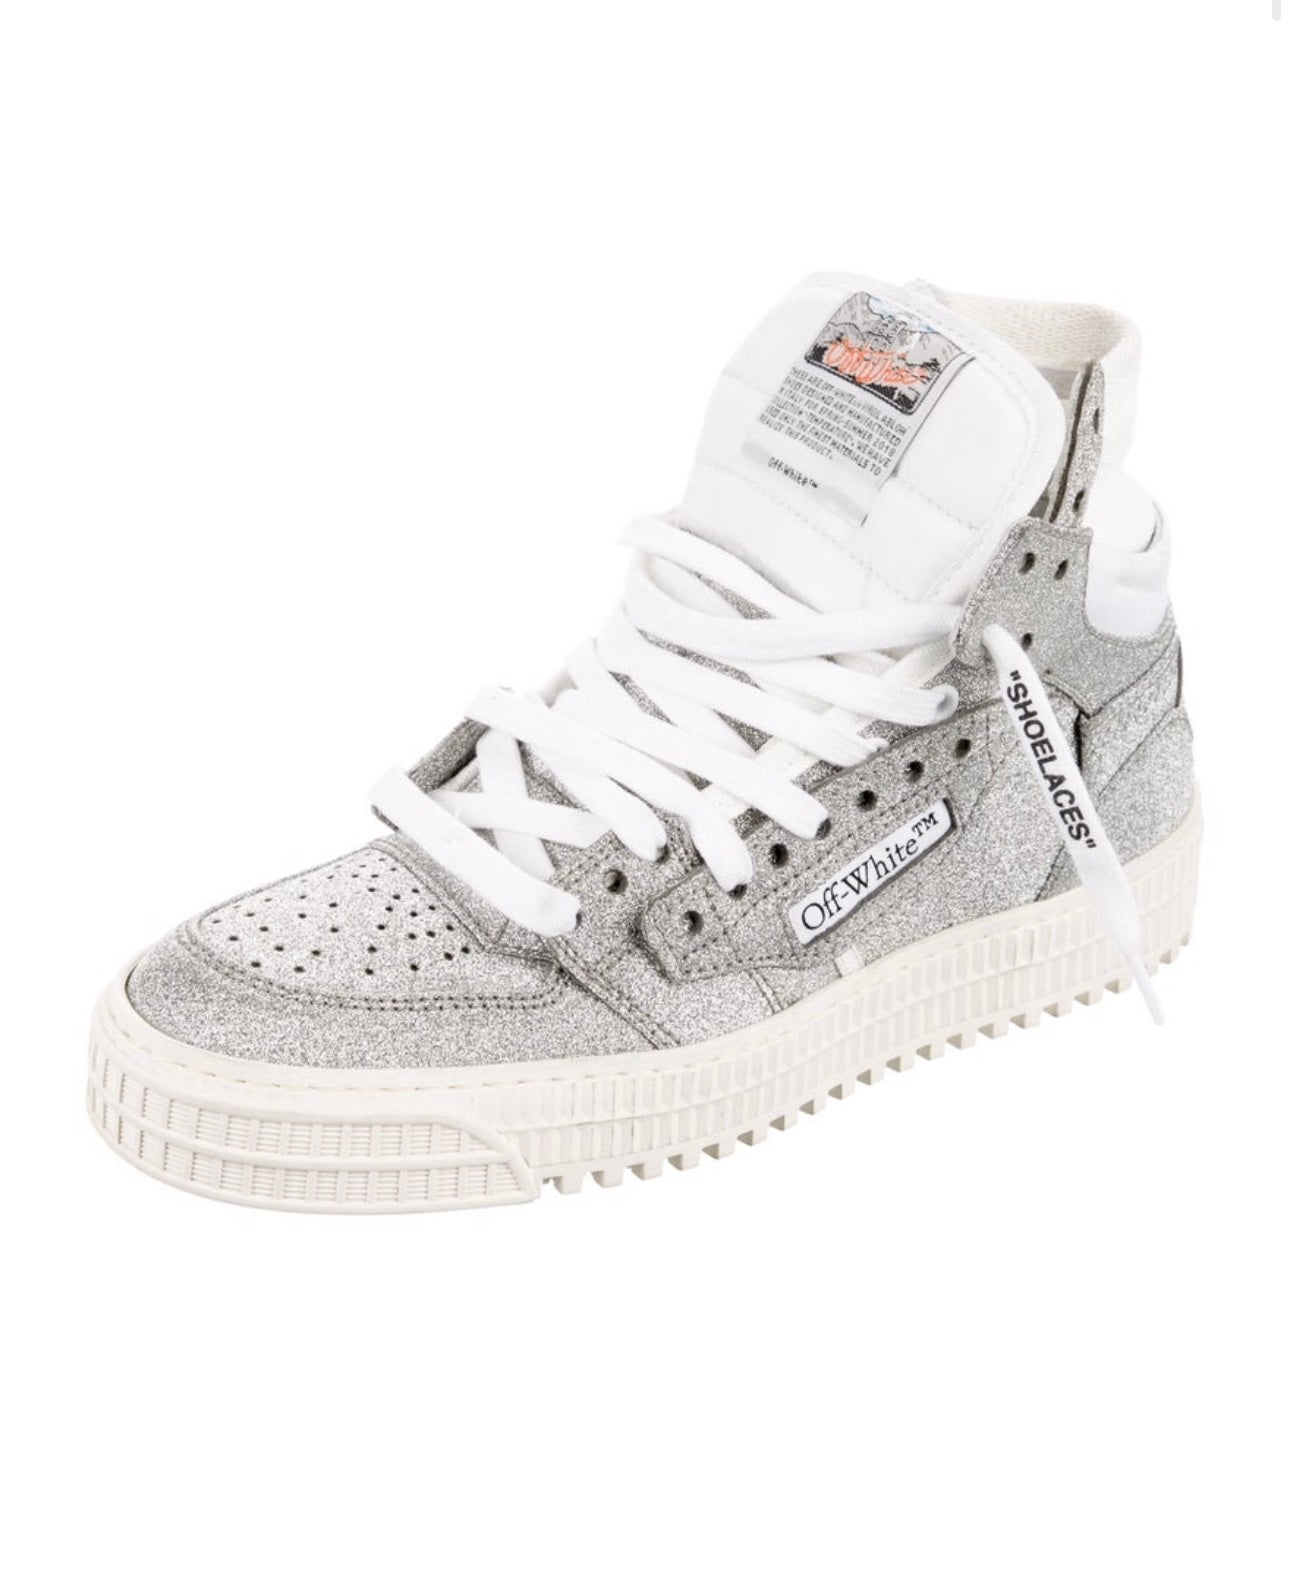 OFF-WHITE - Virgil Abloh Glitter High-Top Court Sneakers